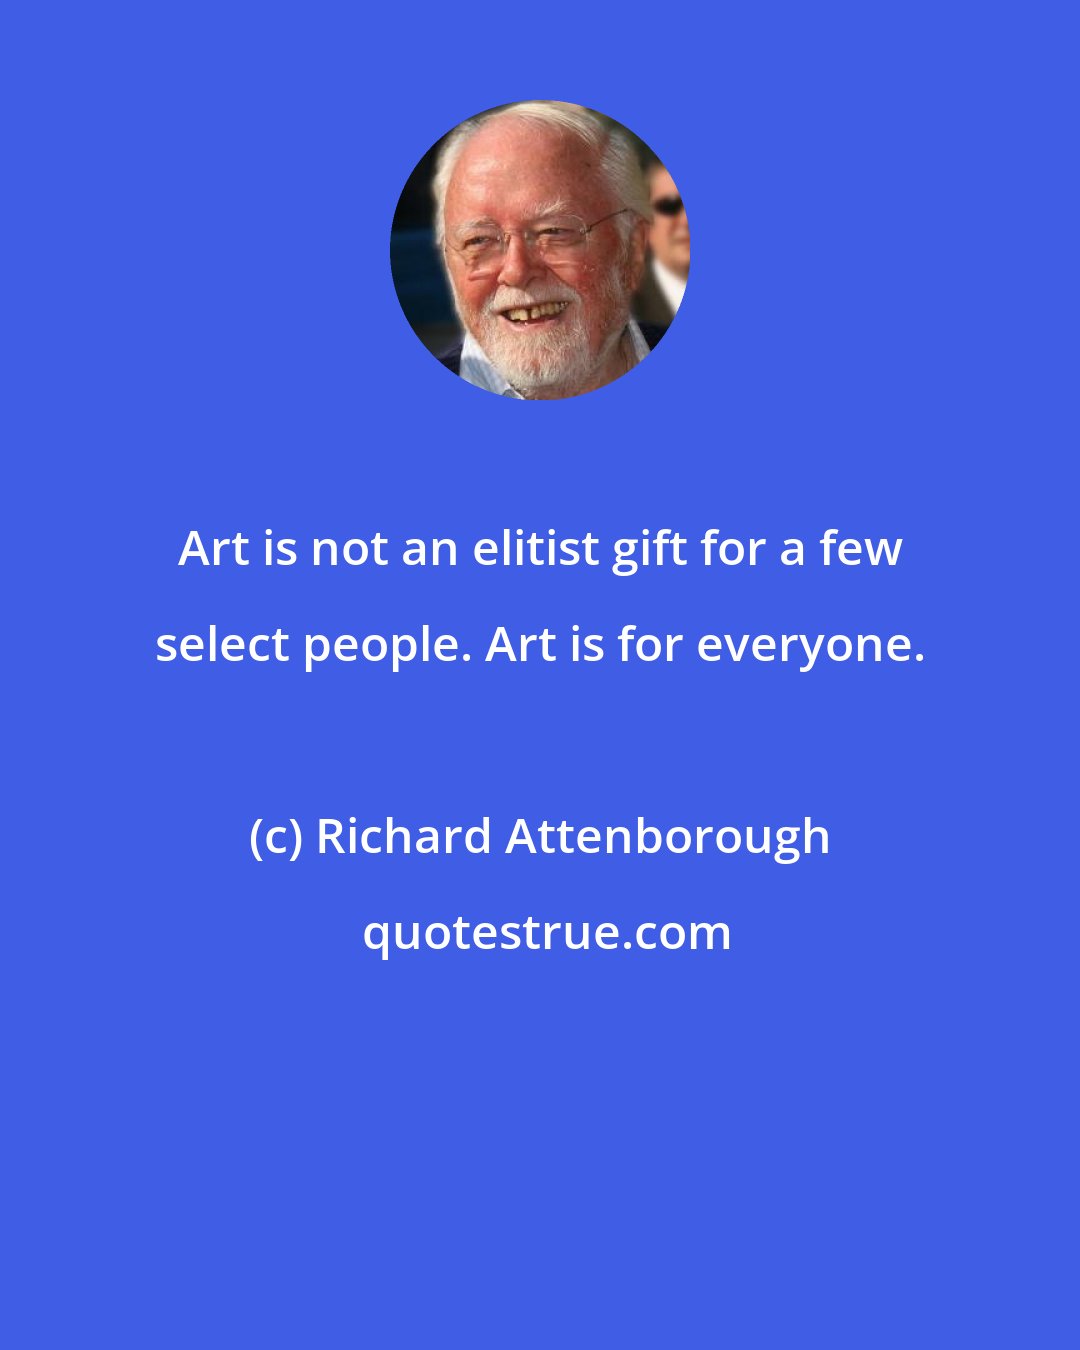 Richard Attenborough: Art is not an elitist gift for a few select people. Art is for everyone.